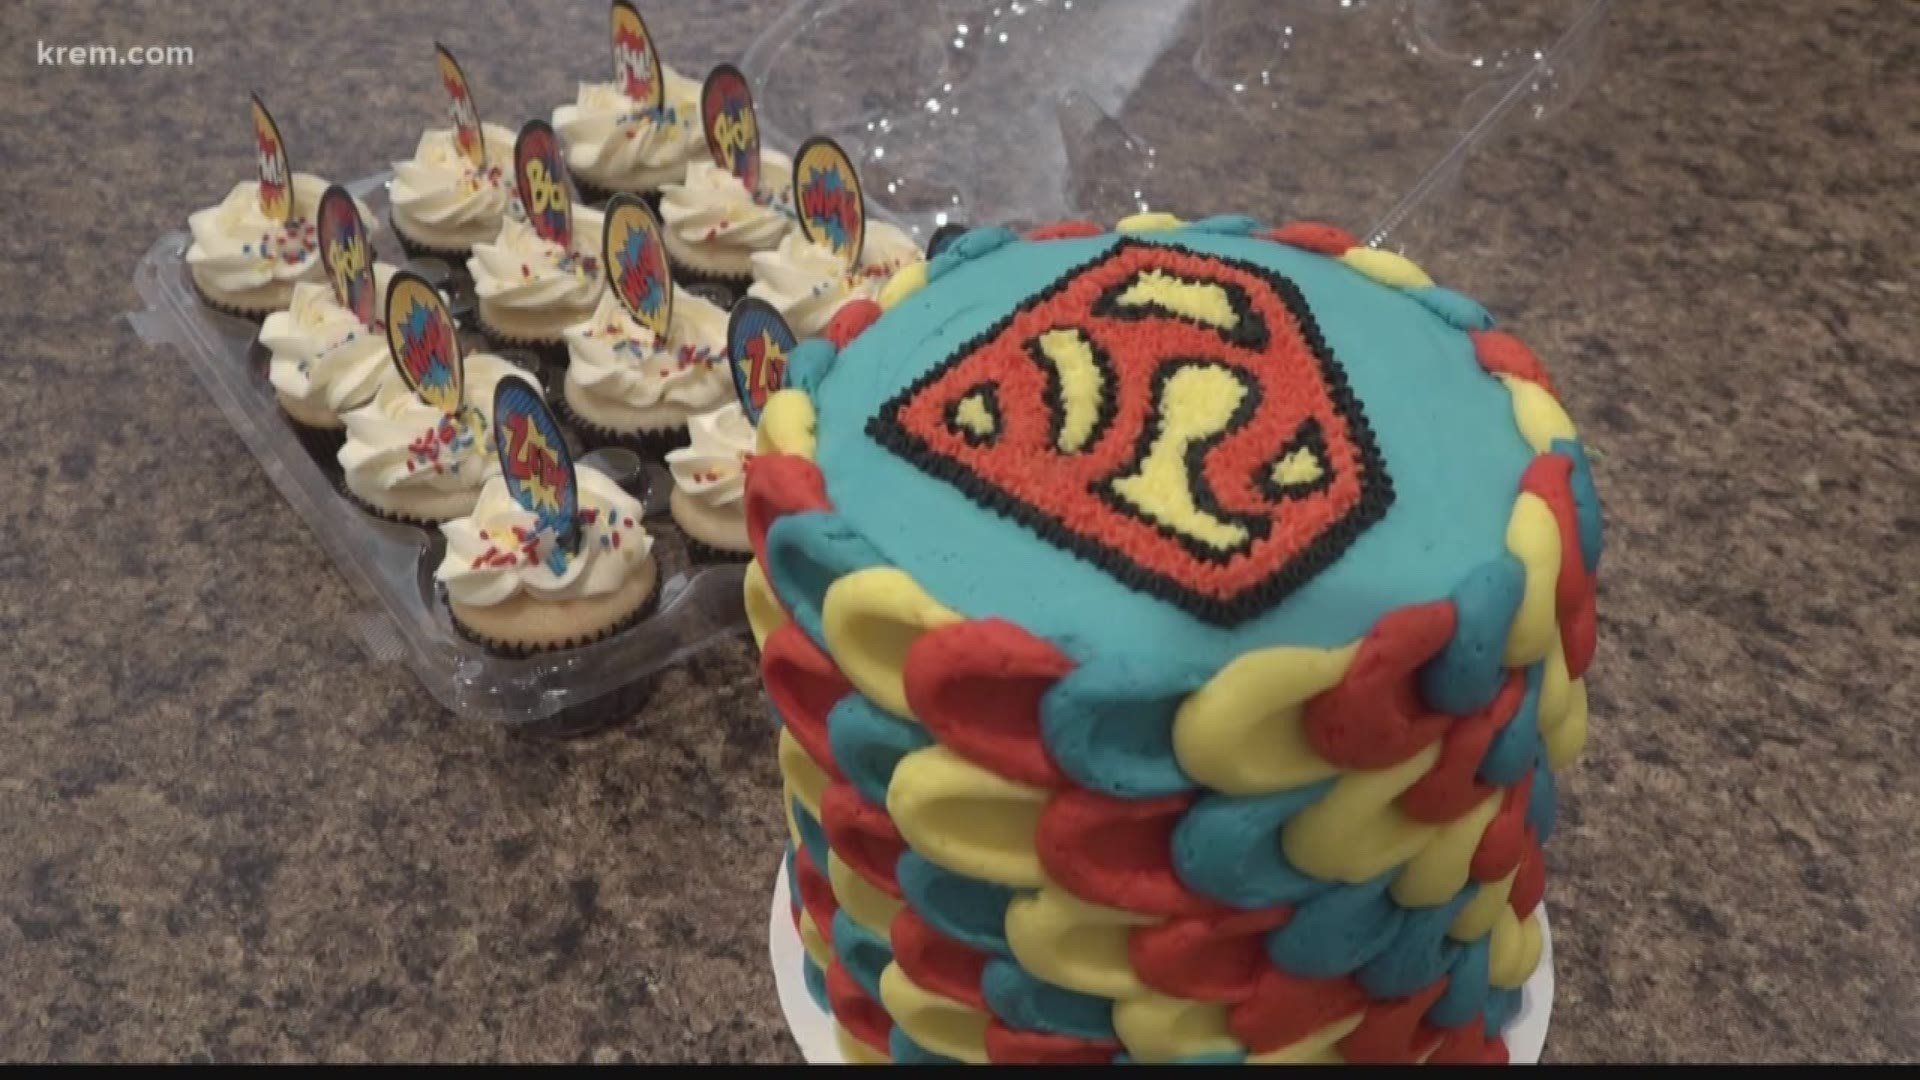 Levi Waterman's third birthday was extra special thanks to a local mom who made him a superman themed cake.